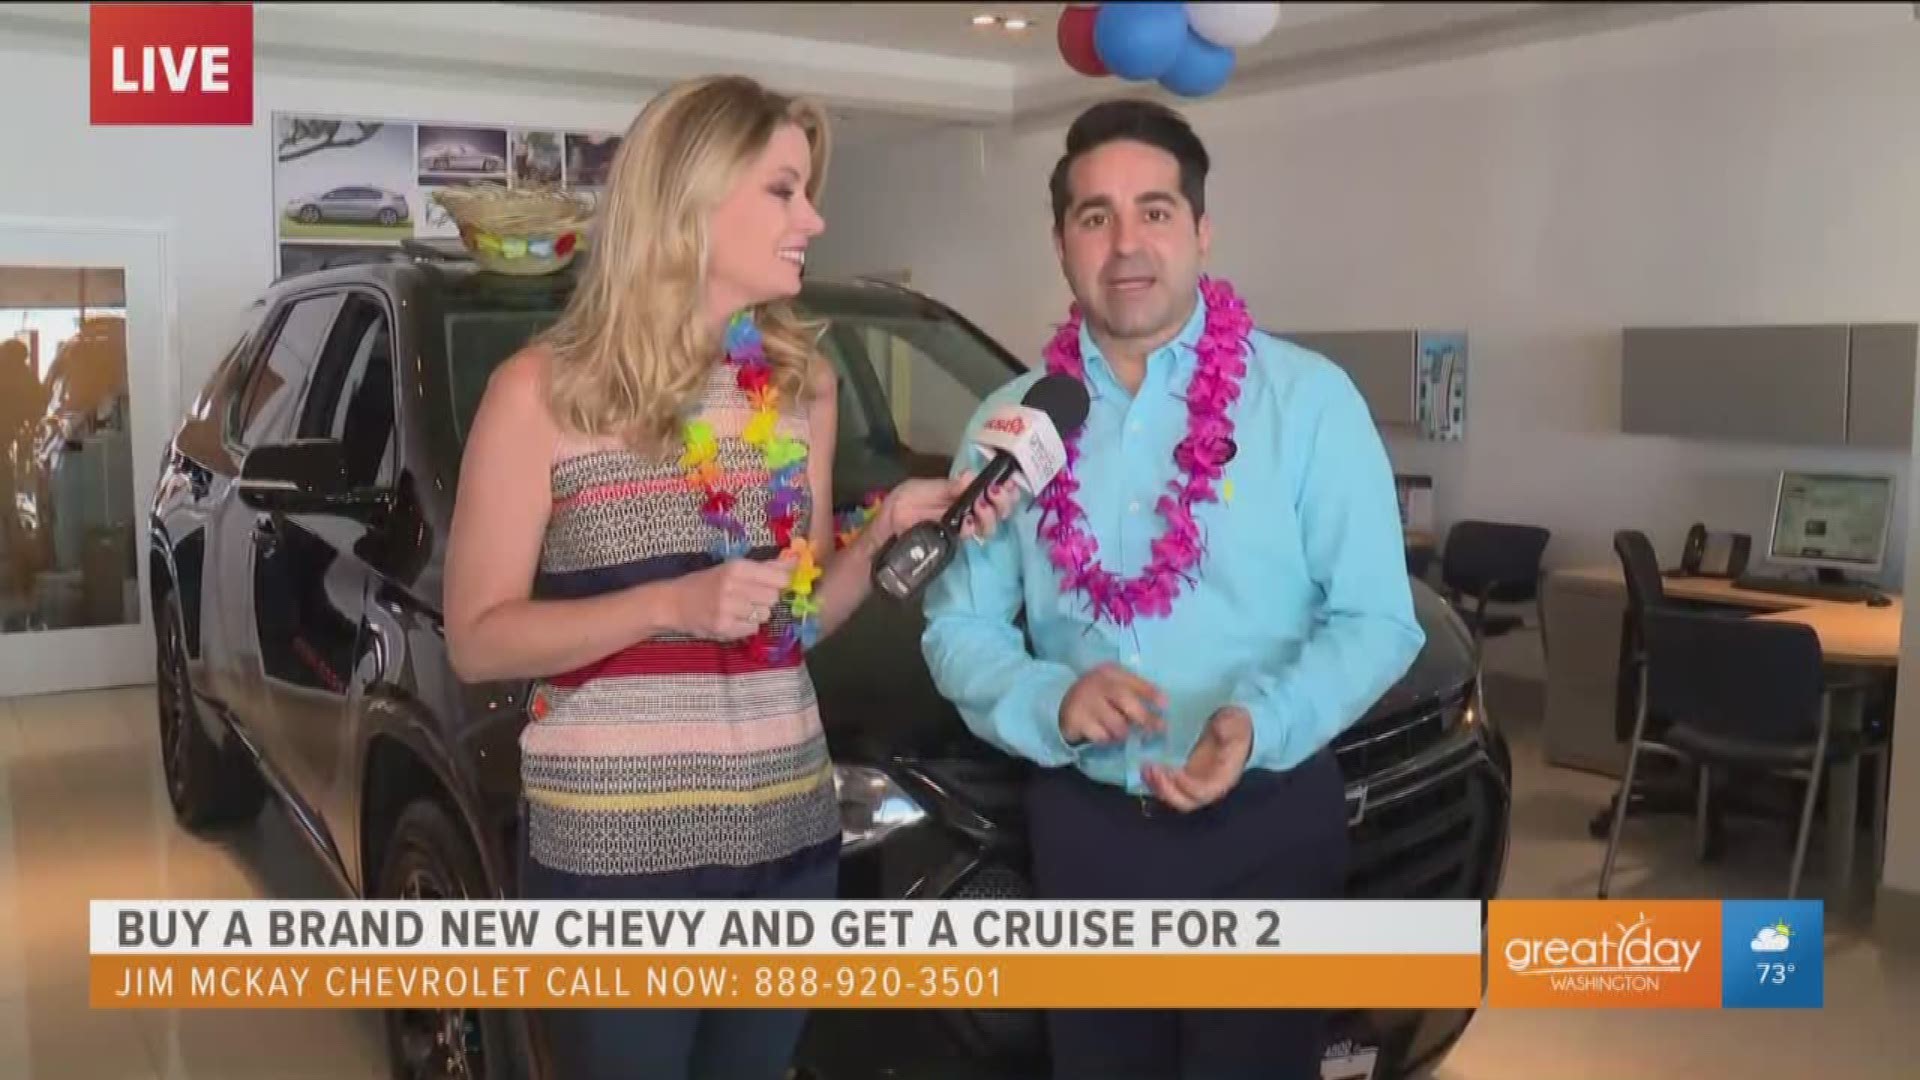 Buy a brand new Chevy at Jim McKay Chevrolet between Friday, May 24 - Monday, May 27, 2019, and you'll get a FREE cruise for two. Jim McKay also has amazing credit amnesty programs for all types of credit. Call 888-920-3501 to make an appointment.